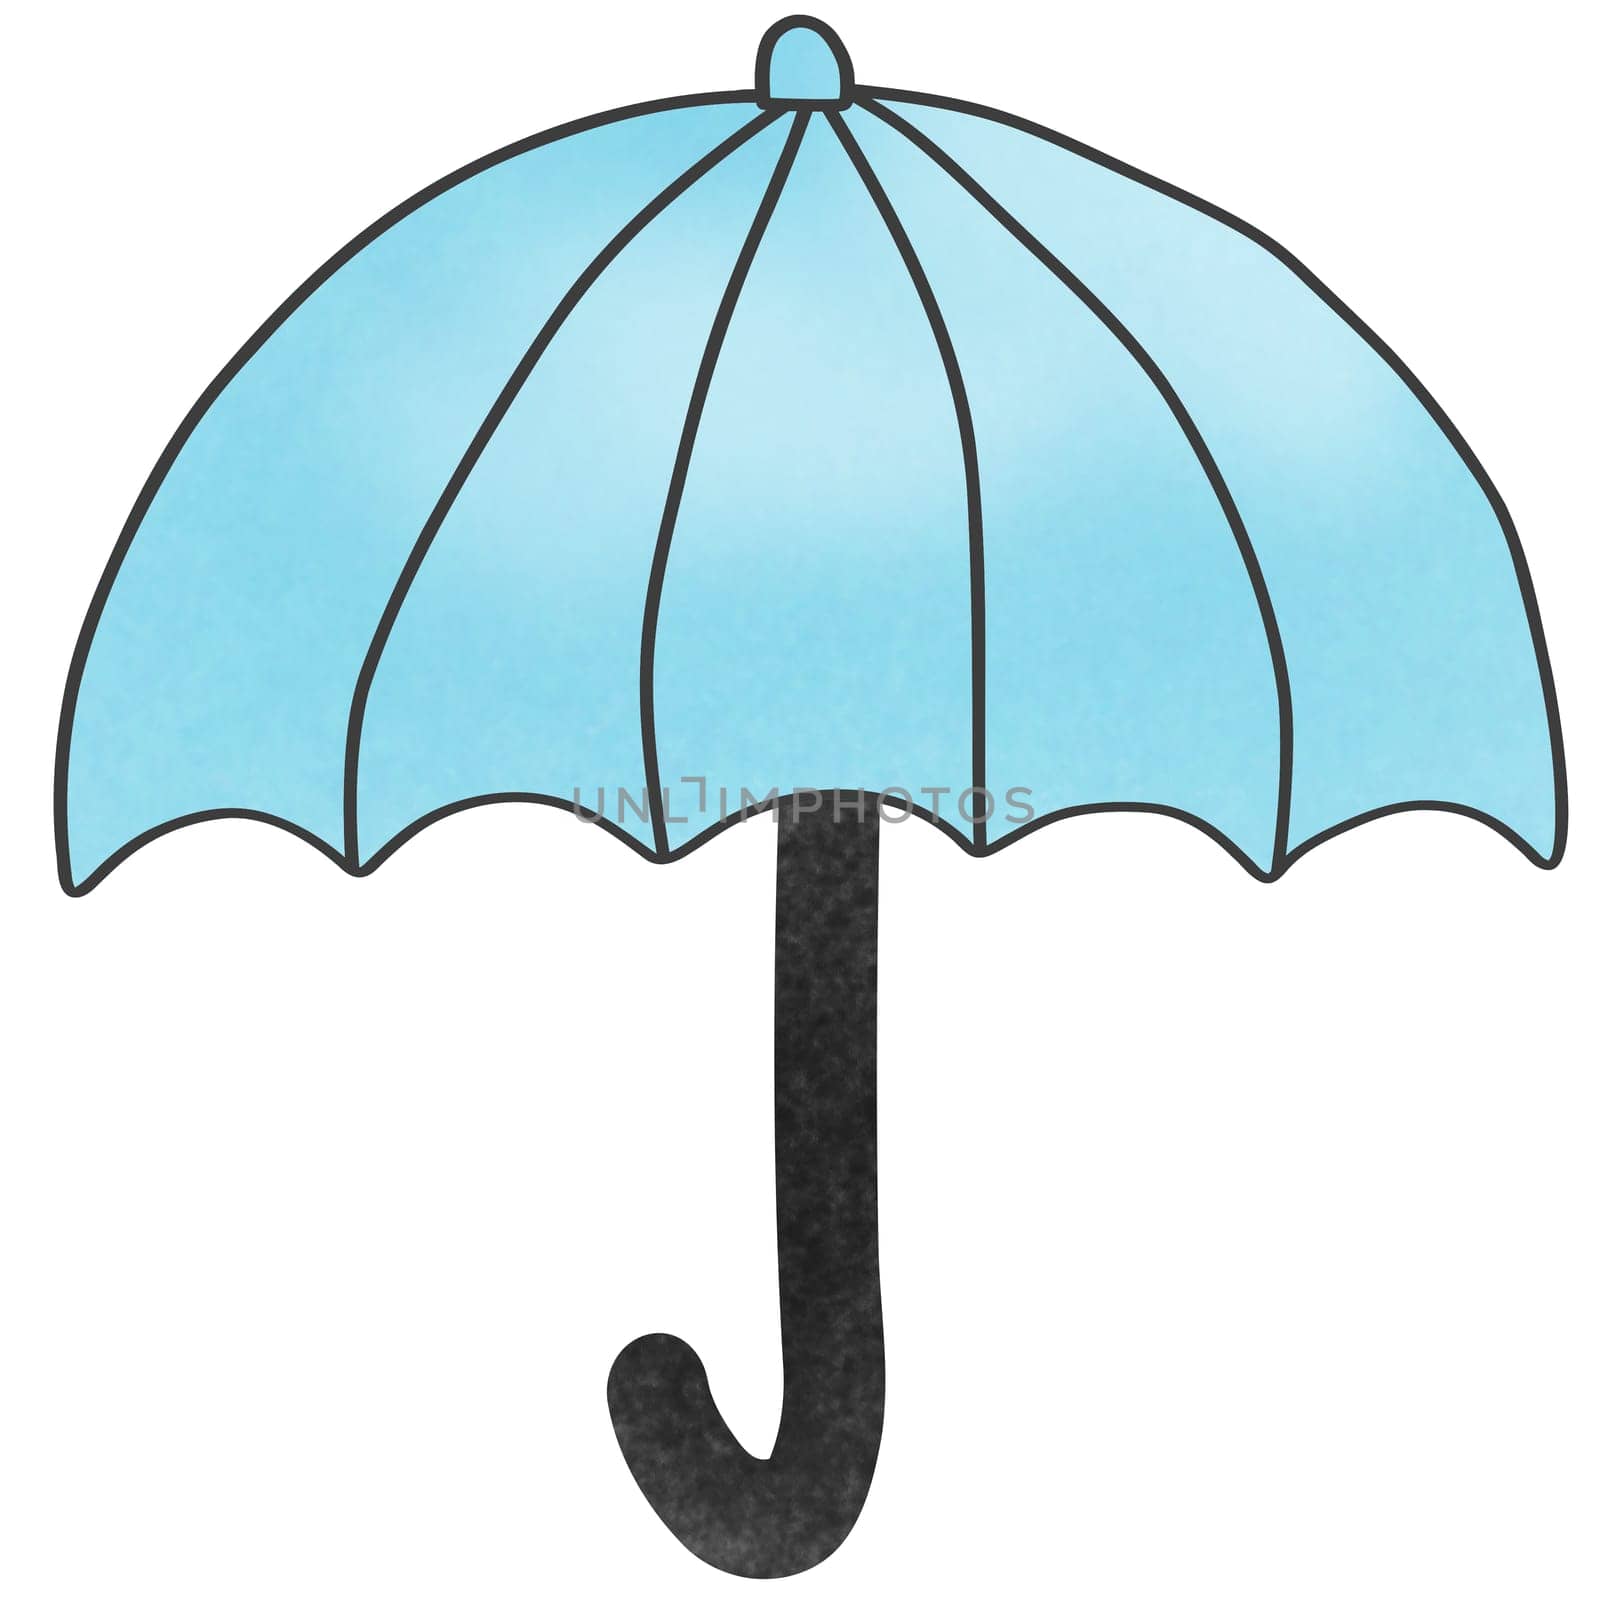 Drawing of blue umbrella isolated on white background for usage as an illustration concept